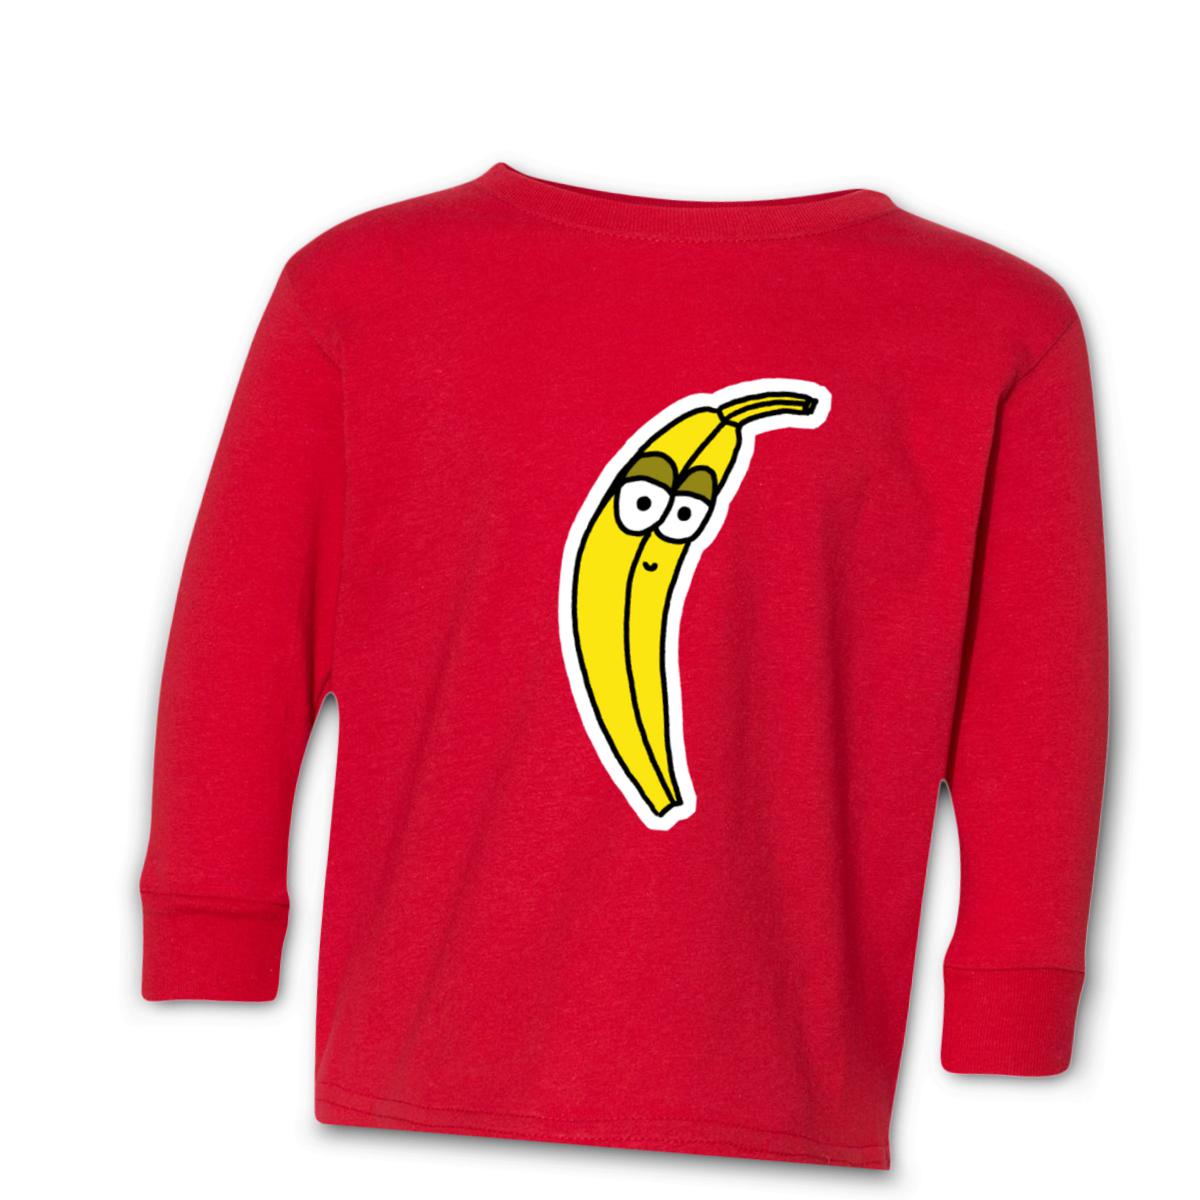 Plantain Kid's Long Sleeve Tee Small red